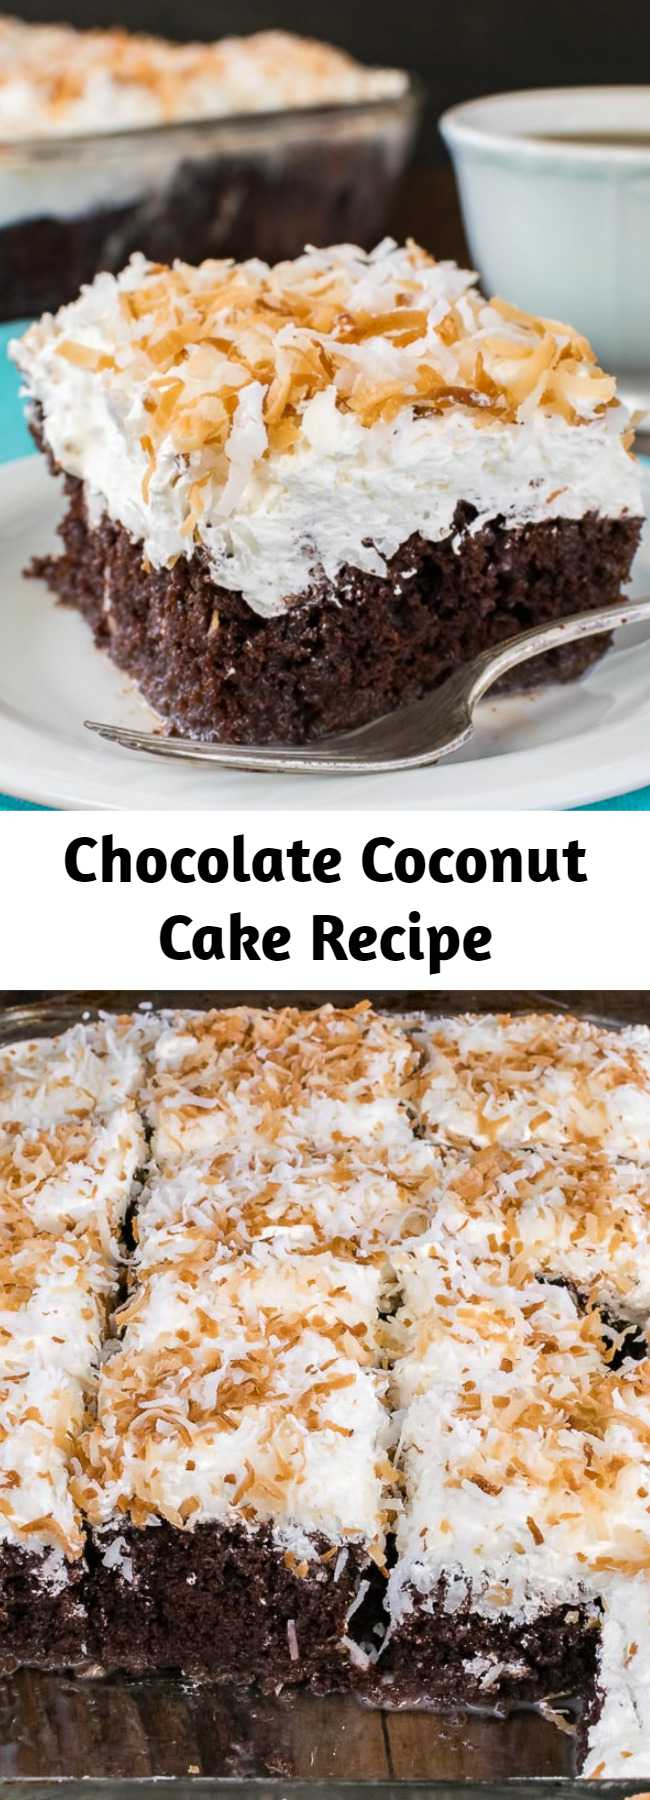 This creamy Chocolate Coconut Cake will get rave reviews from the coconut lovers in your life.  Make a pan and watch it disappear!